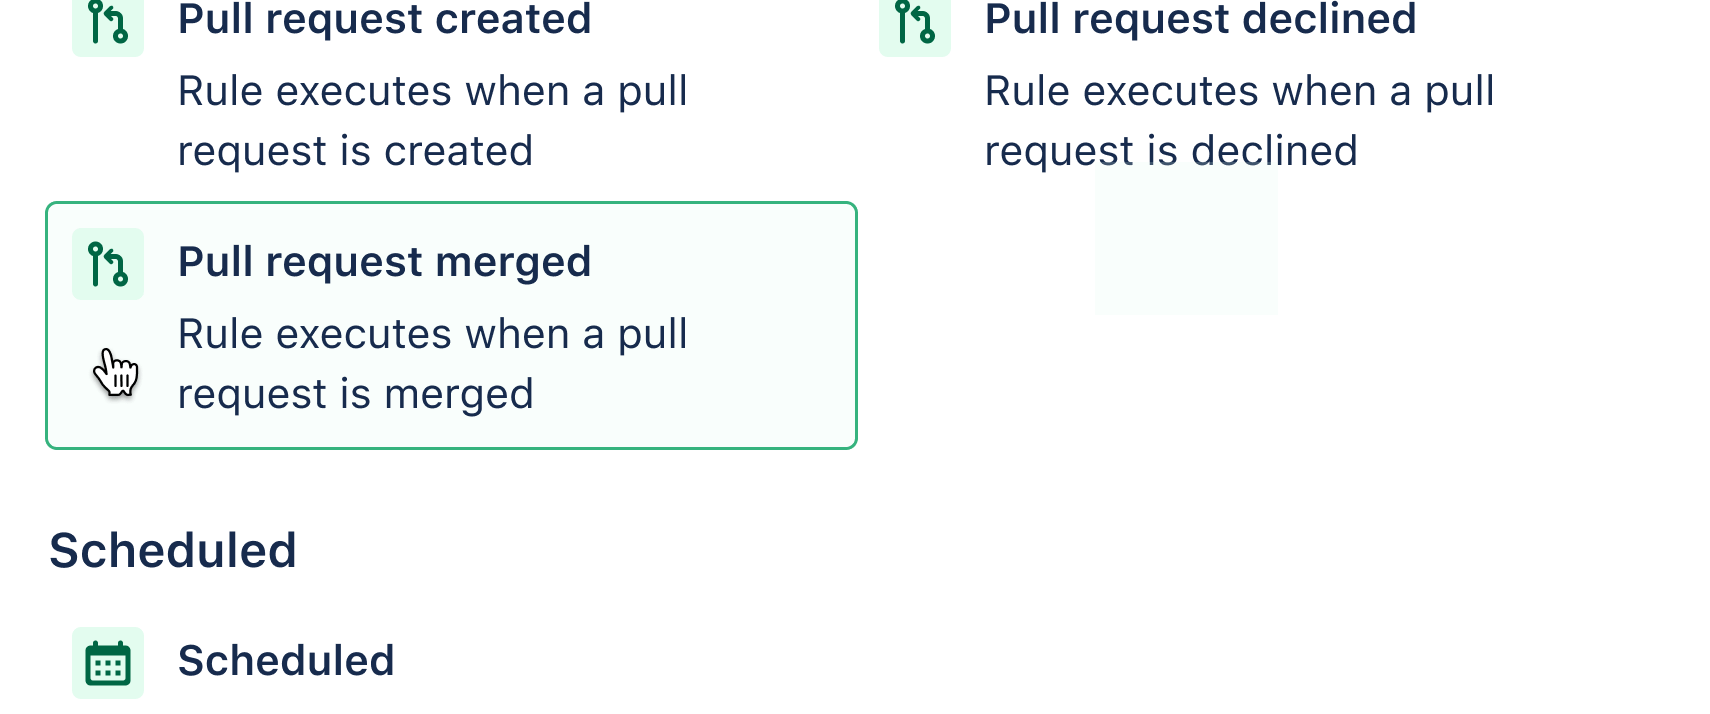 Choose pull request merged